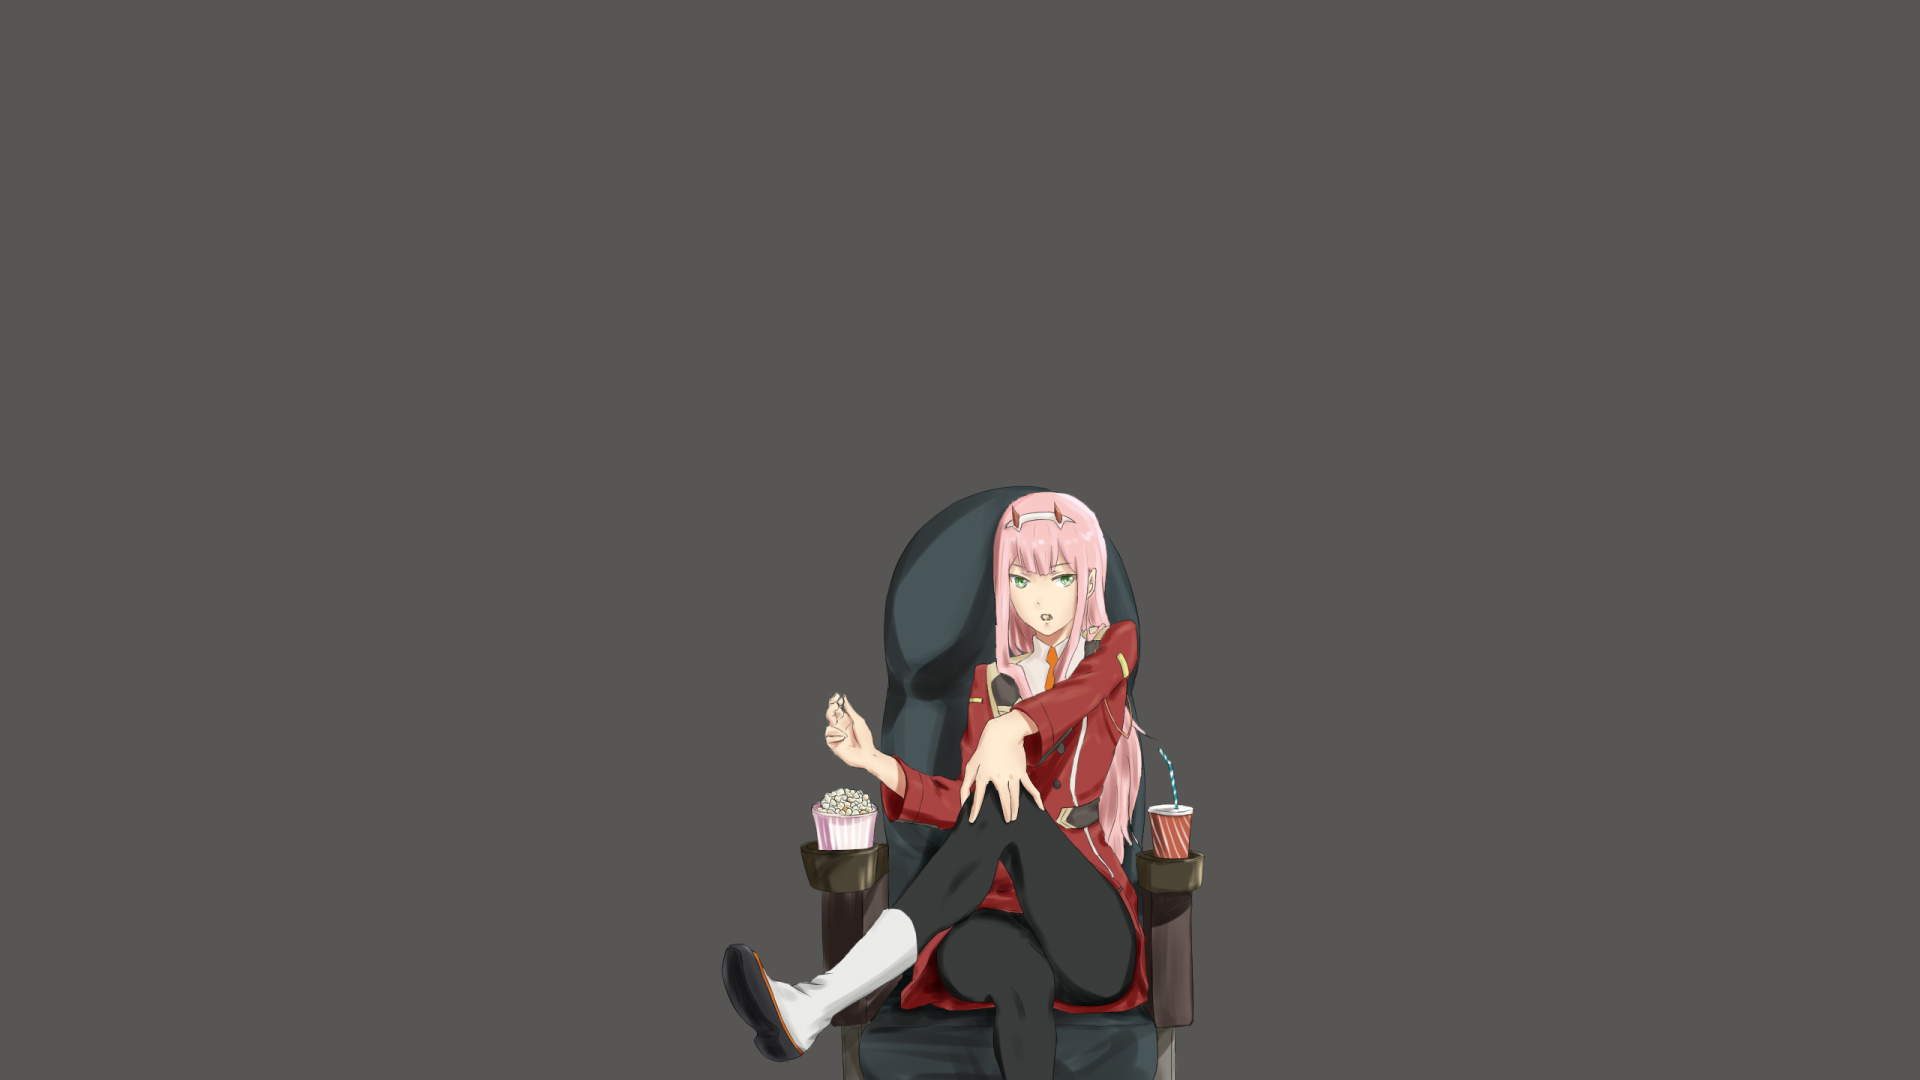 Darling In The FranXX Zero Two Hiro Zero Two Sitting On Chair With Popcorn And Cooldrinks With Black Wallpaper HD